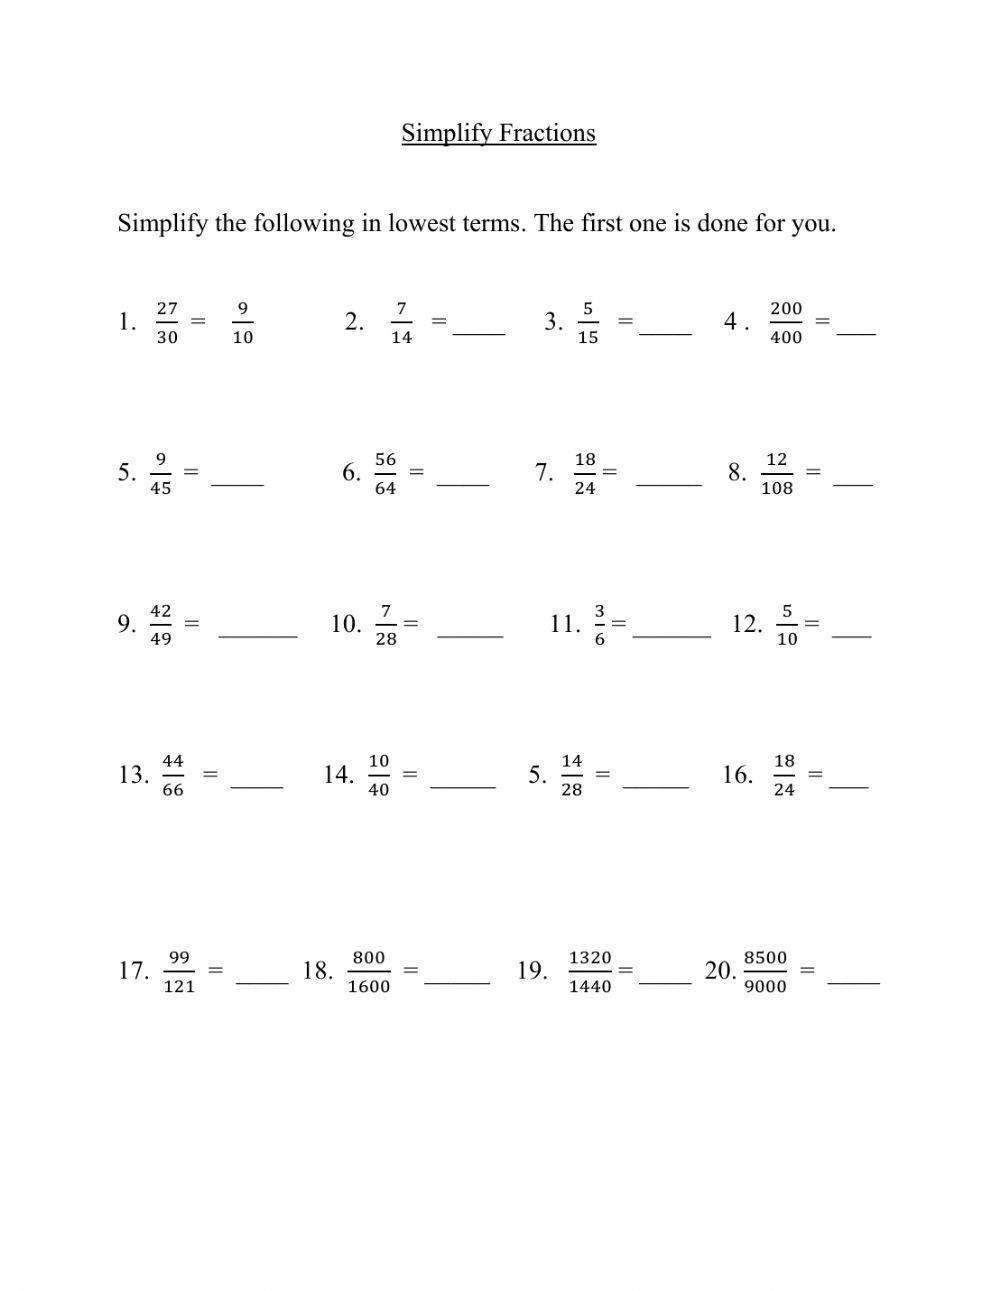 Simplify fractions